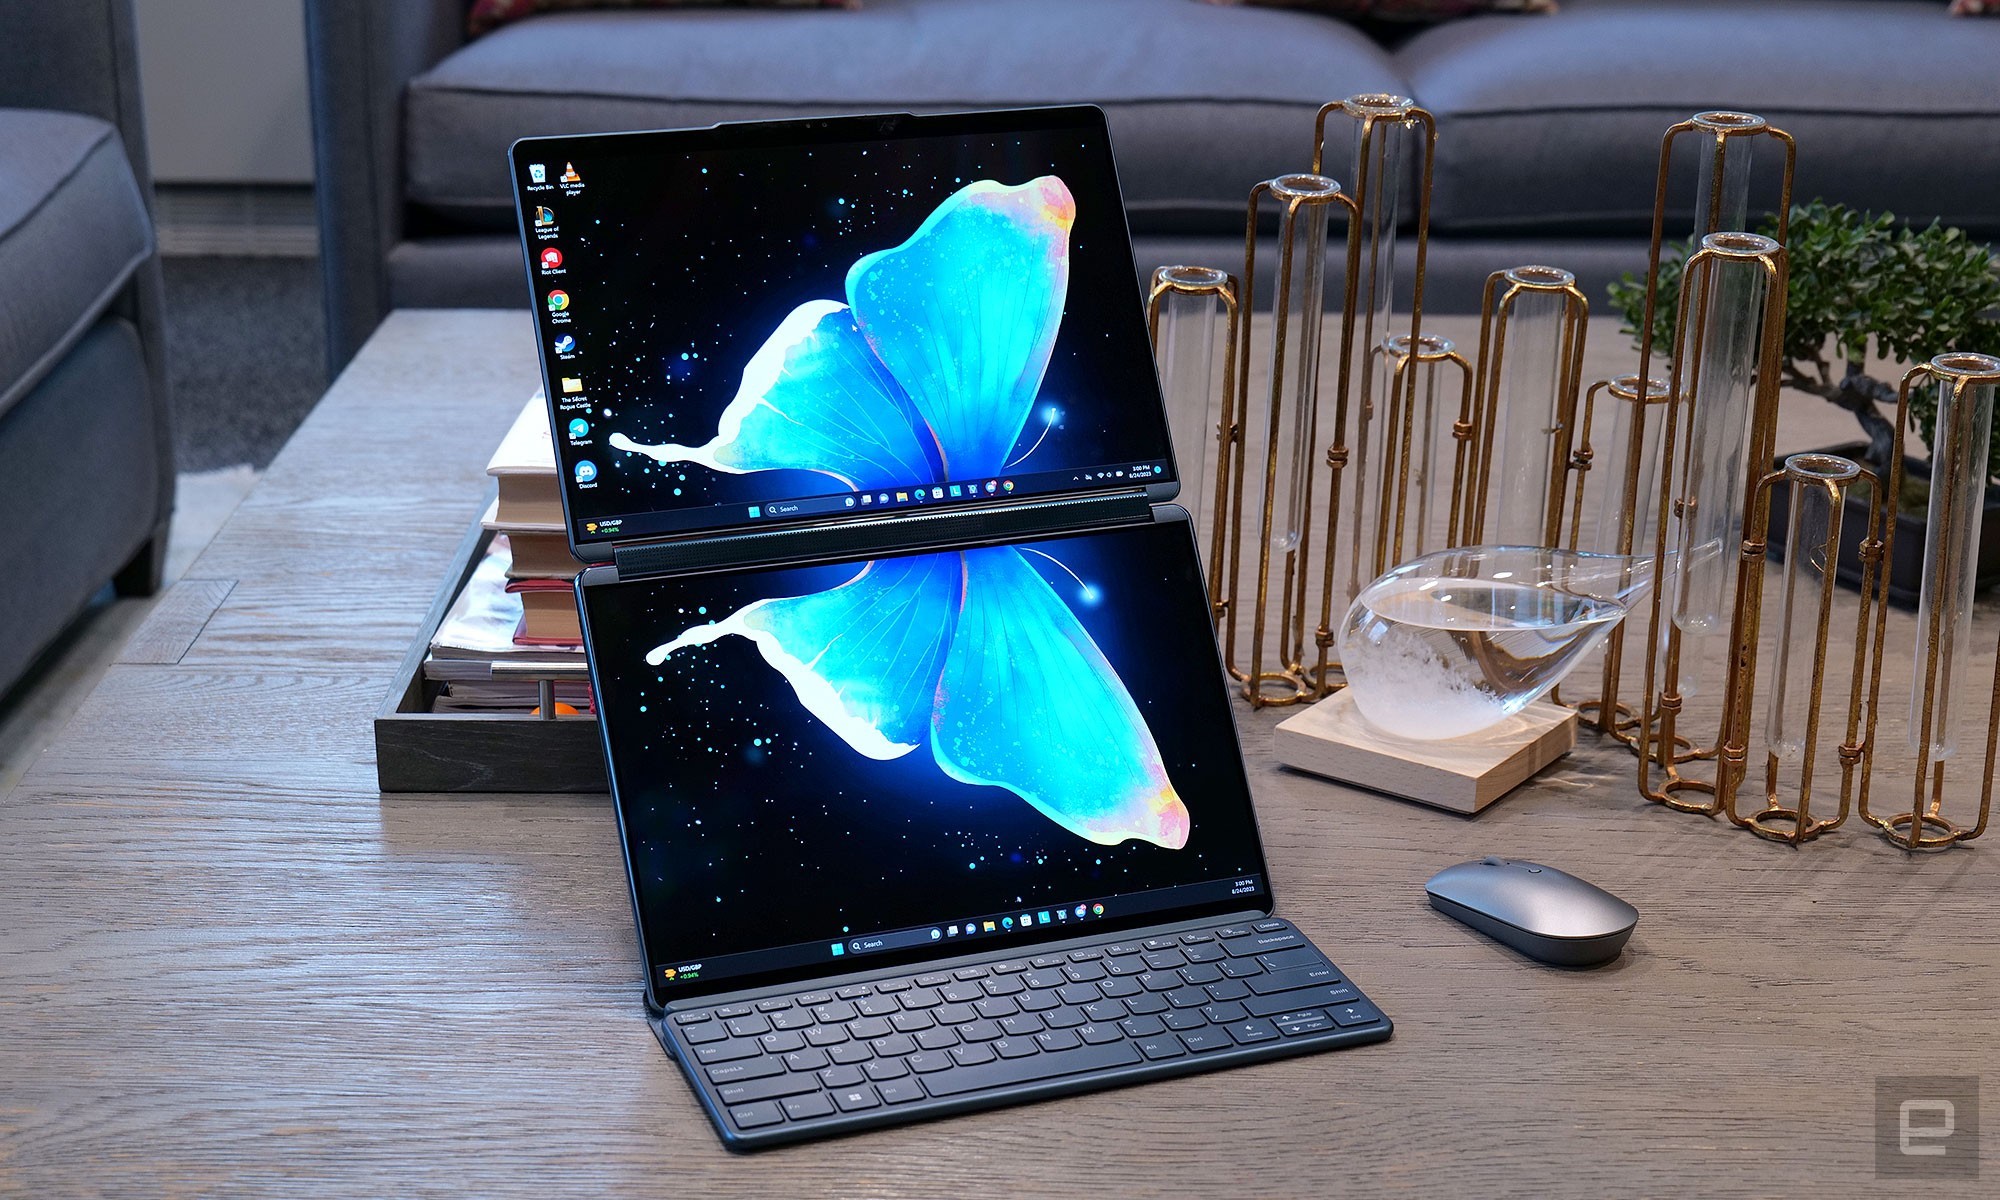 The Yoga Book 9i's stacked display setup might be its most useful mode, as it lets you keep a big project open up top while reserving the bottom screen from email, messaging and more. | DeviceDaily.com